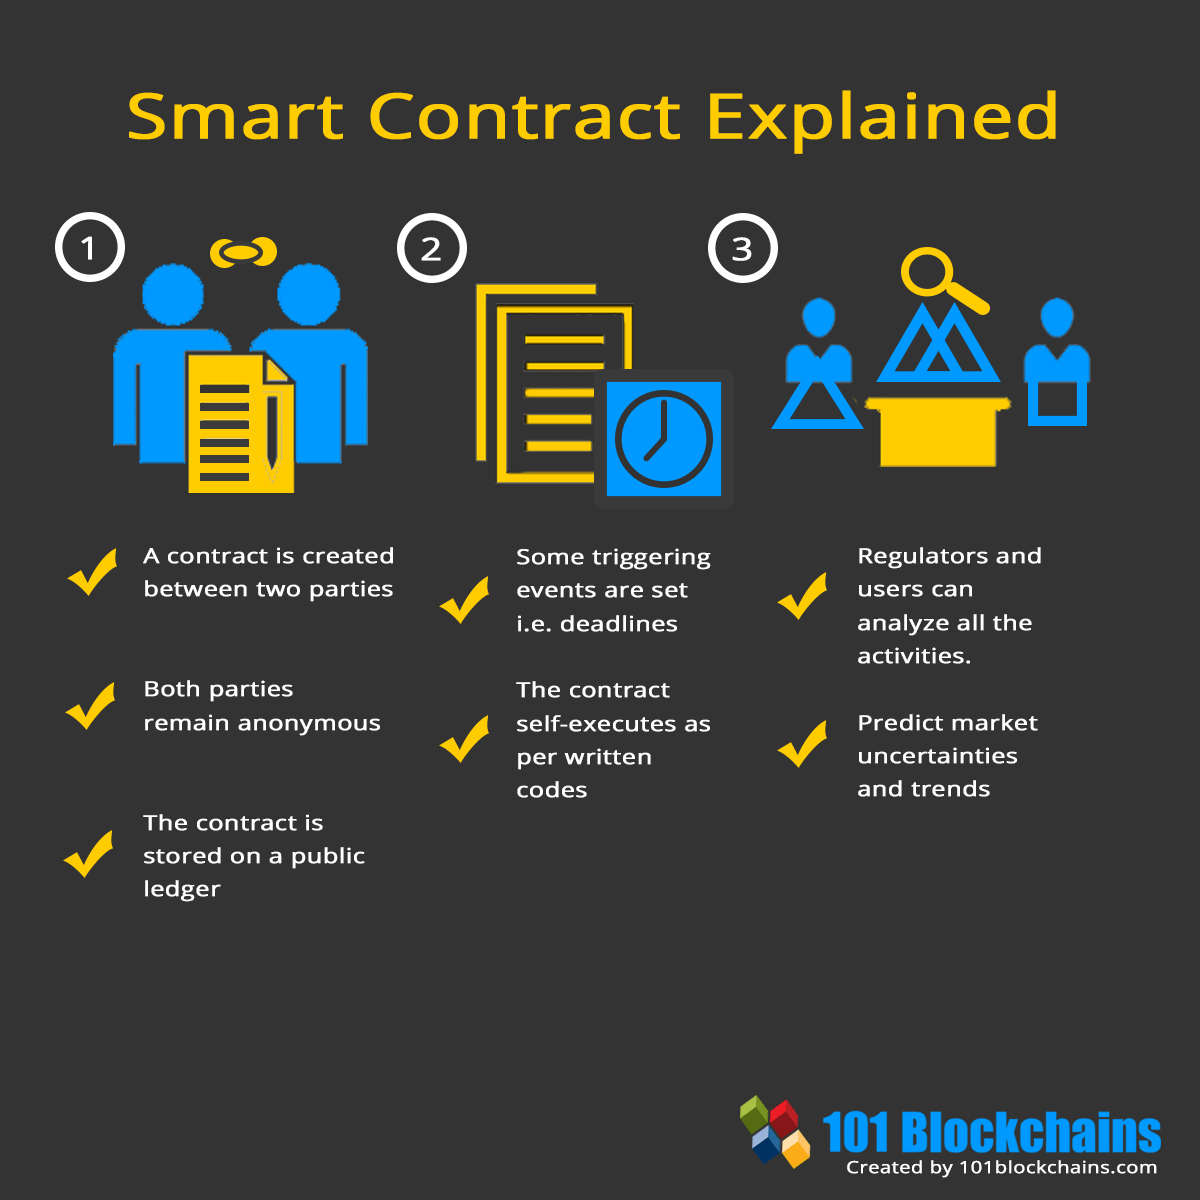 SMART CONTRACT EXPLAINED